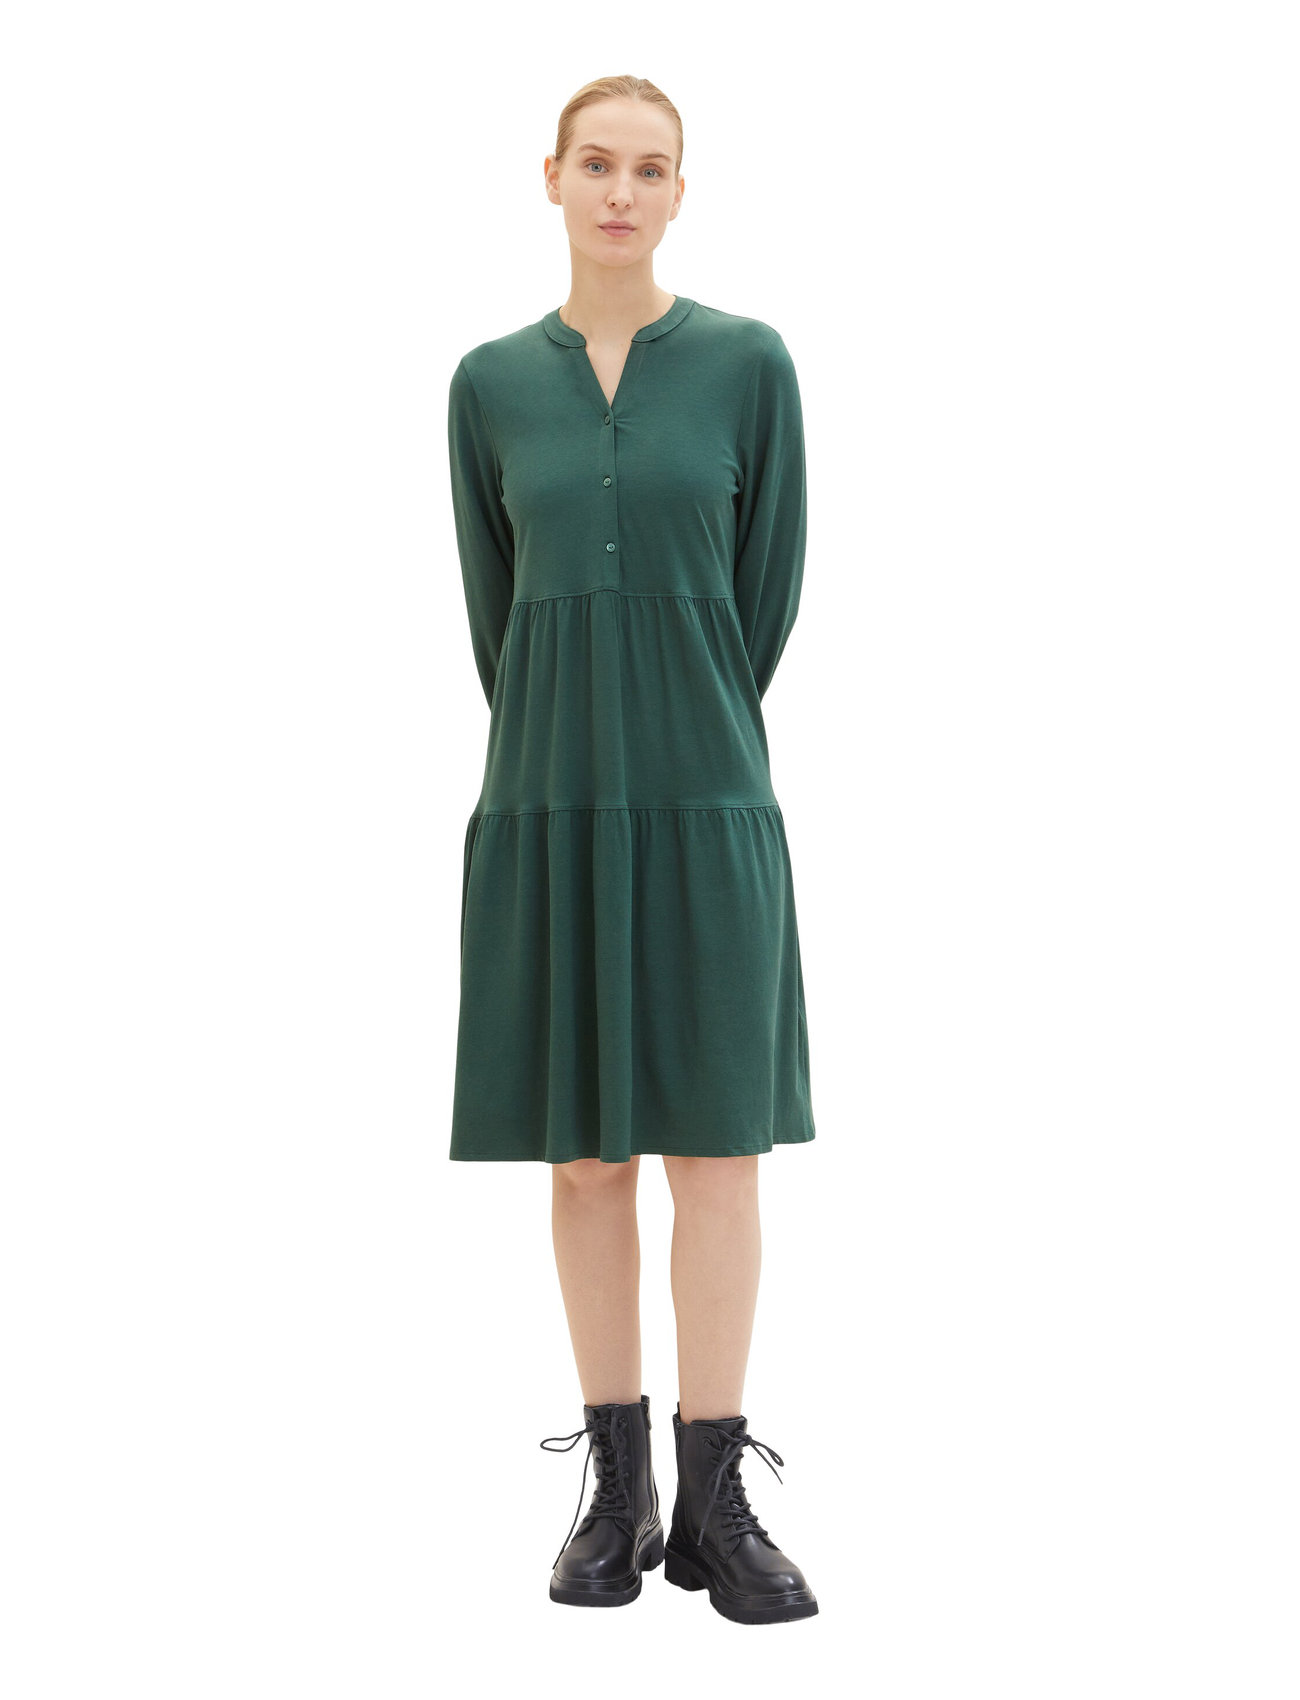 Tom Tailor Dress Jersey With Volants - Short Dresses